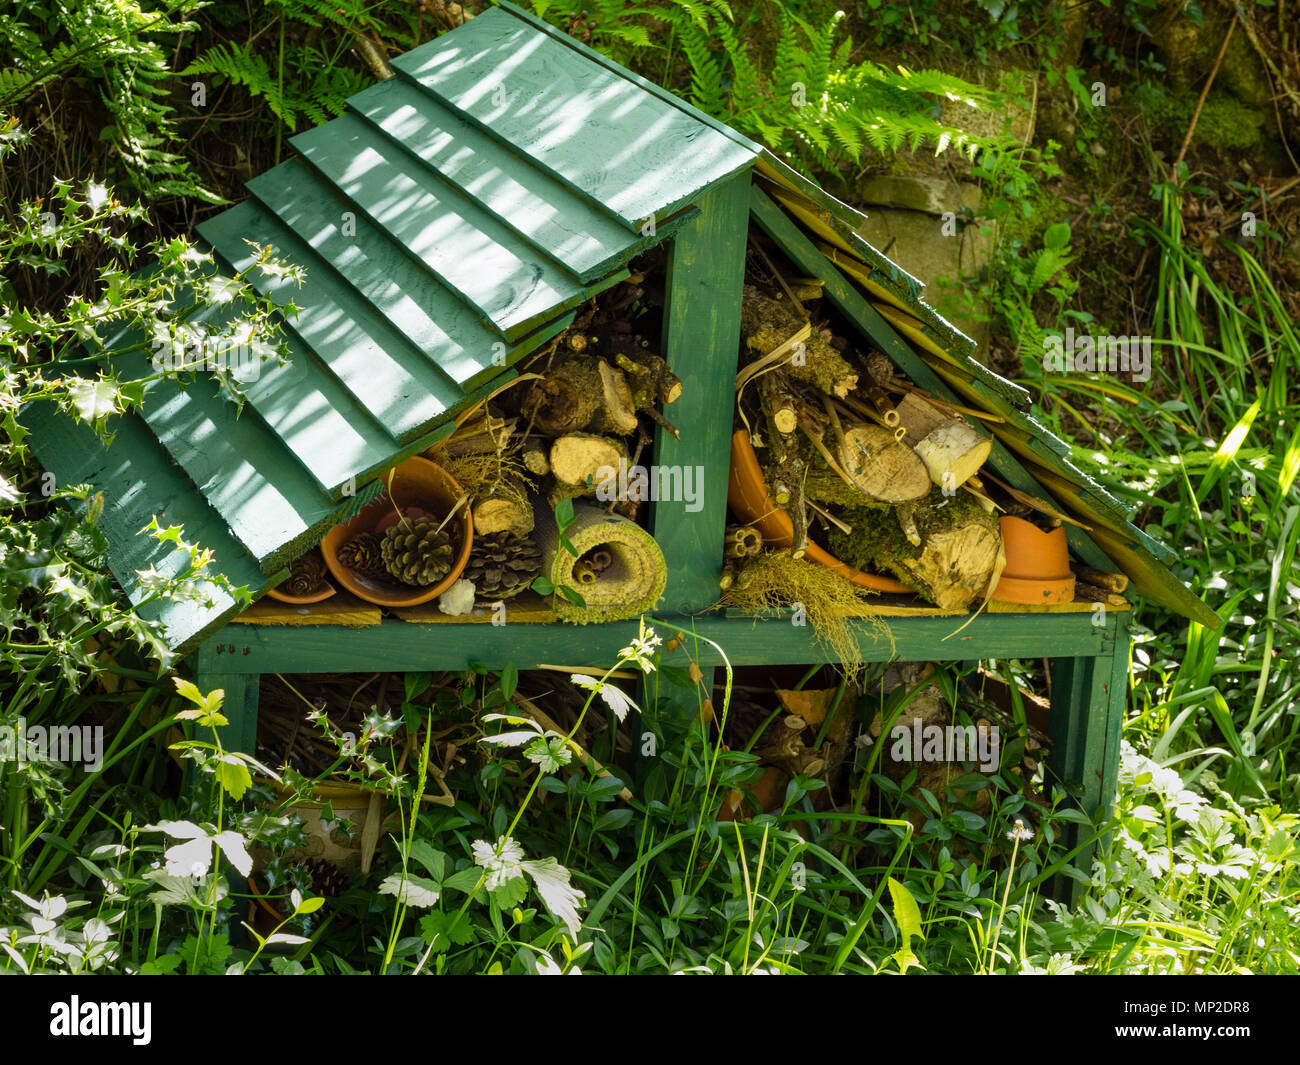 Bug hotel for sheltering and attracting insects and other wildlife to the garden Stock Photo